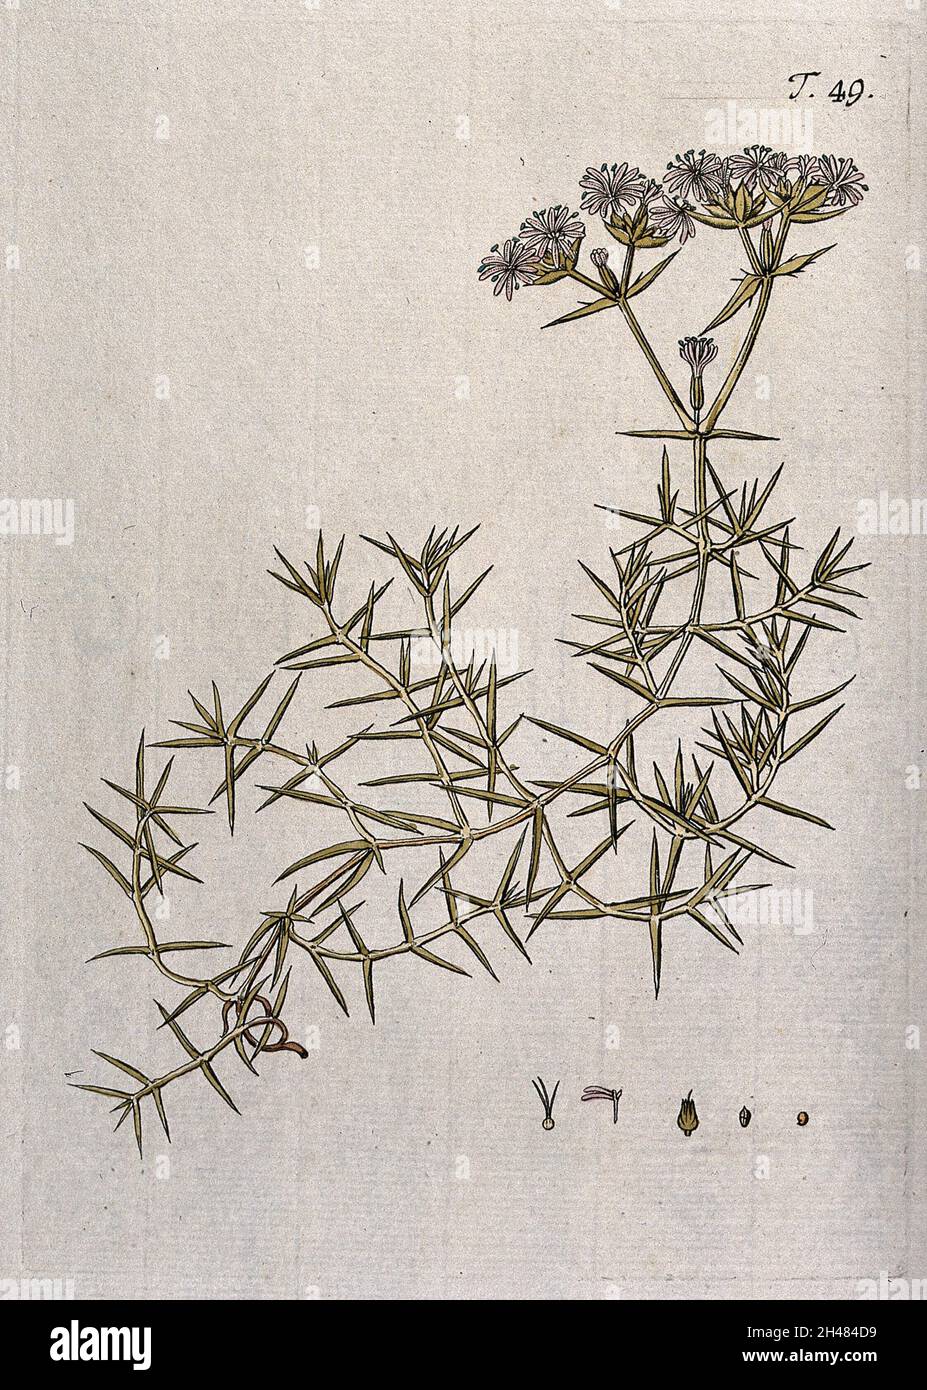 Drypis spinosa L.: flowering stem with separate flower, fruit and seed. Coloured engraving after F. von Scheidl, 1770. Stock Photo